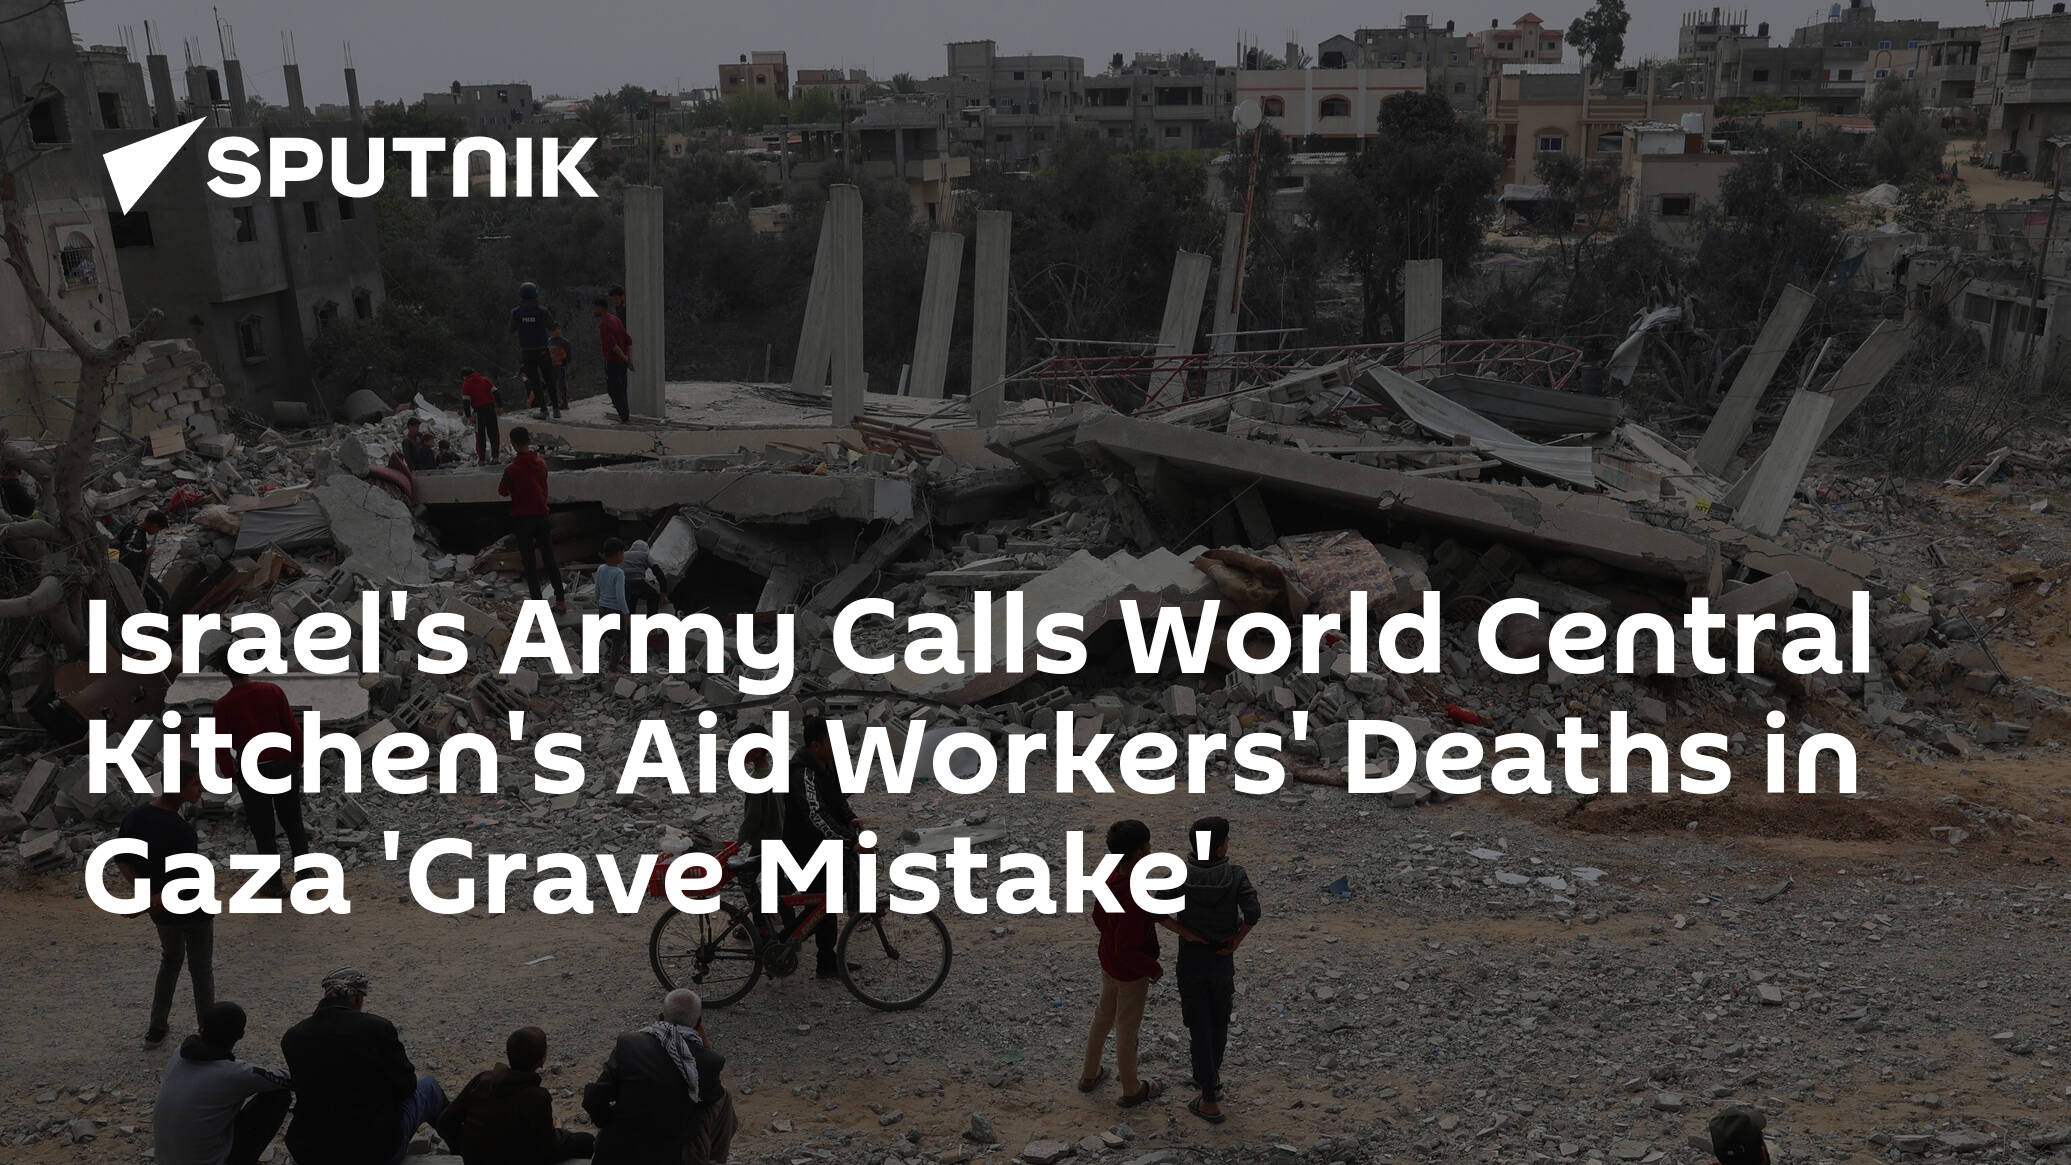 Israel's Army Calls World Central Kitchen's Aid Workers' Deaths in Gaza 'Grave Mistake'